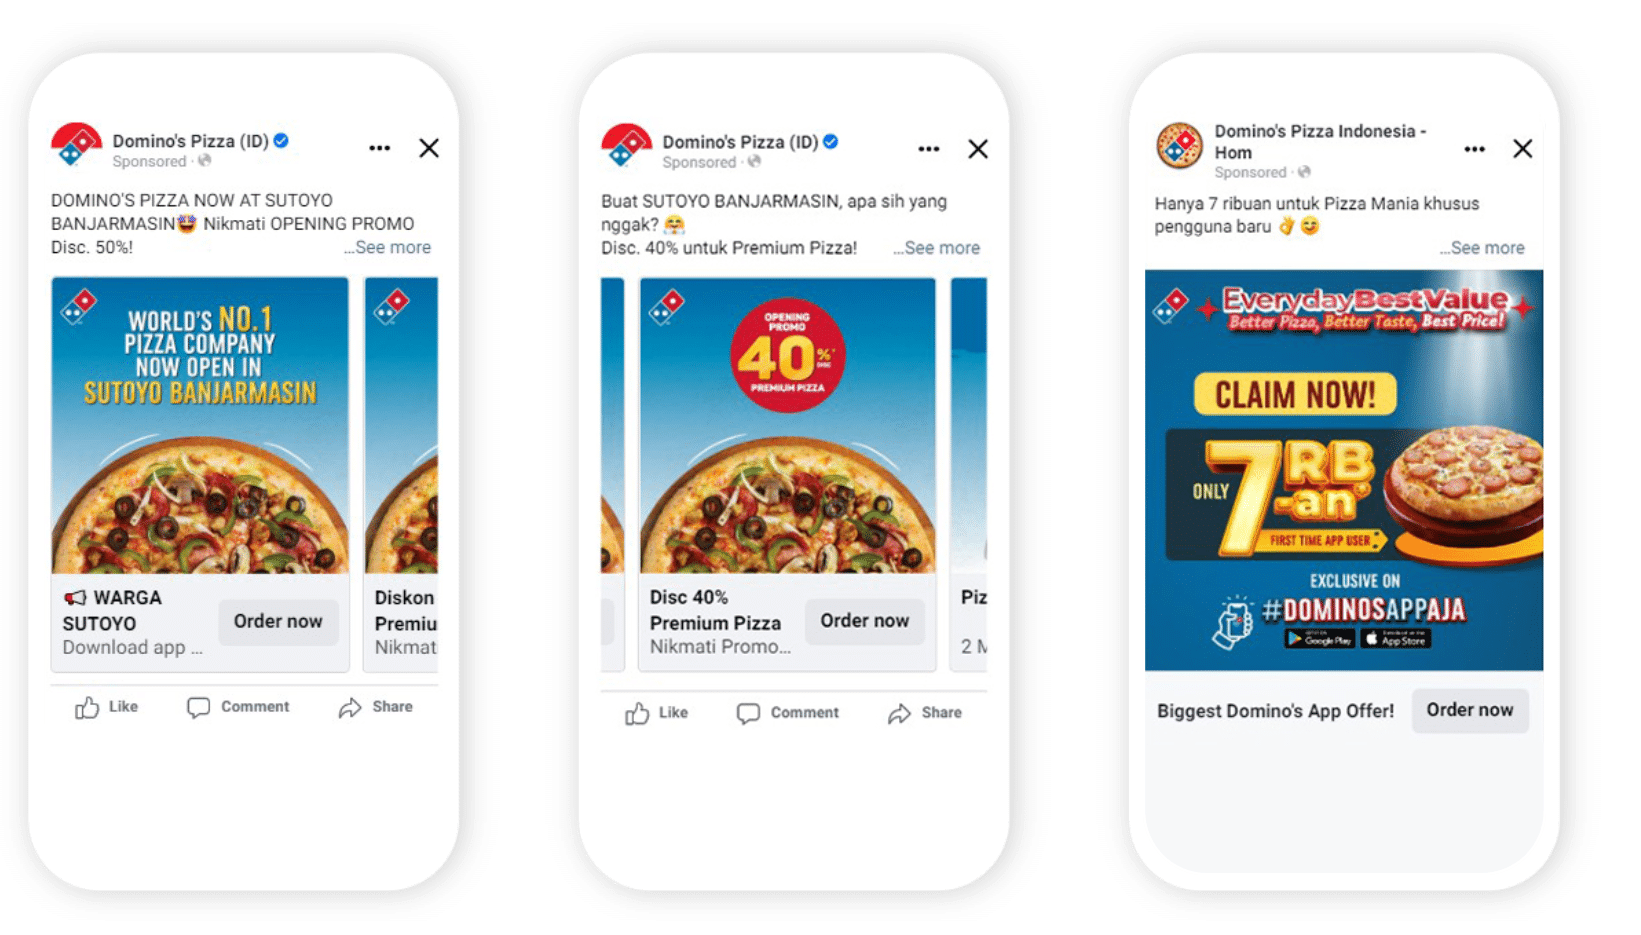 Three images of personalized Domino's ads. Image 1: Opening promotion offering a 50% discount. "World's No. 1 pizza company now open in Sutoyo Banjarmasin" Image 2: 40% off premium pizza Image 3: Biggest Domino's App Offer, exclusive on #DominosAppAja